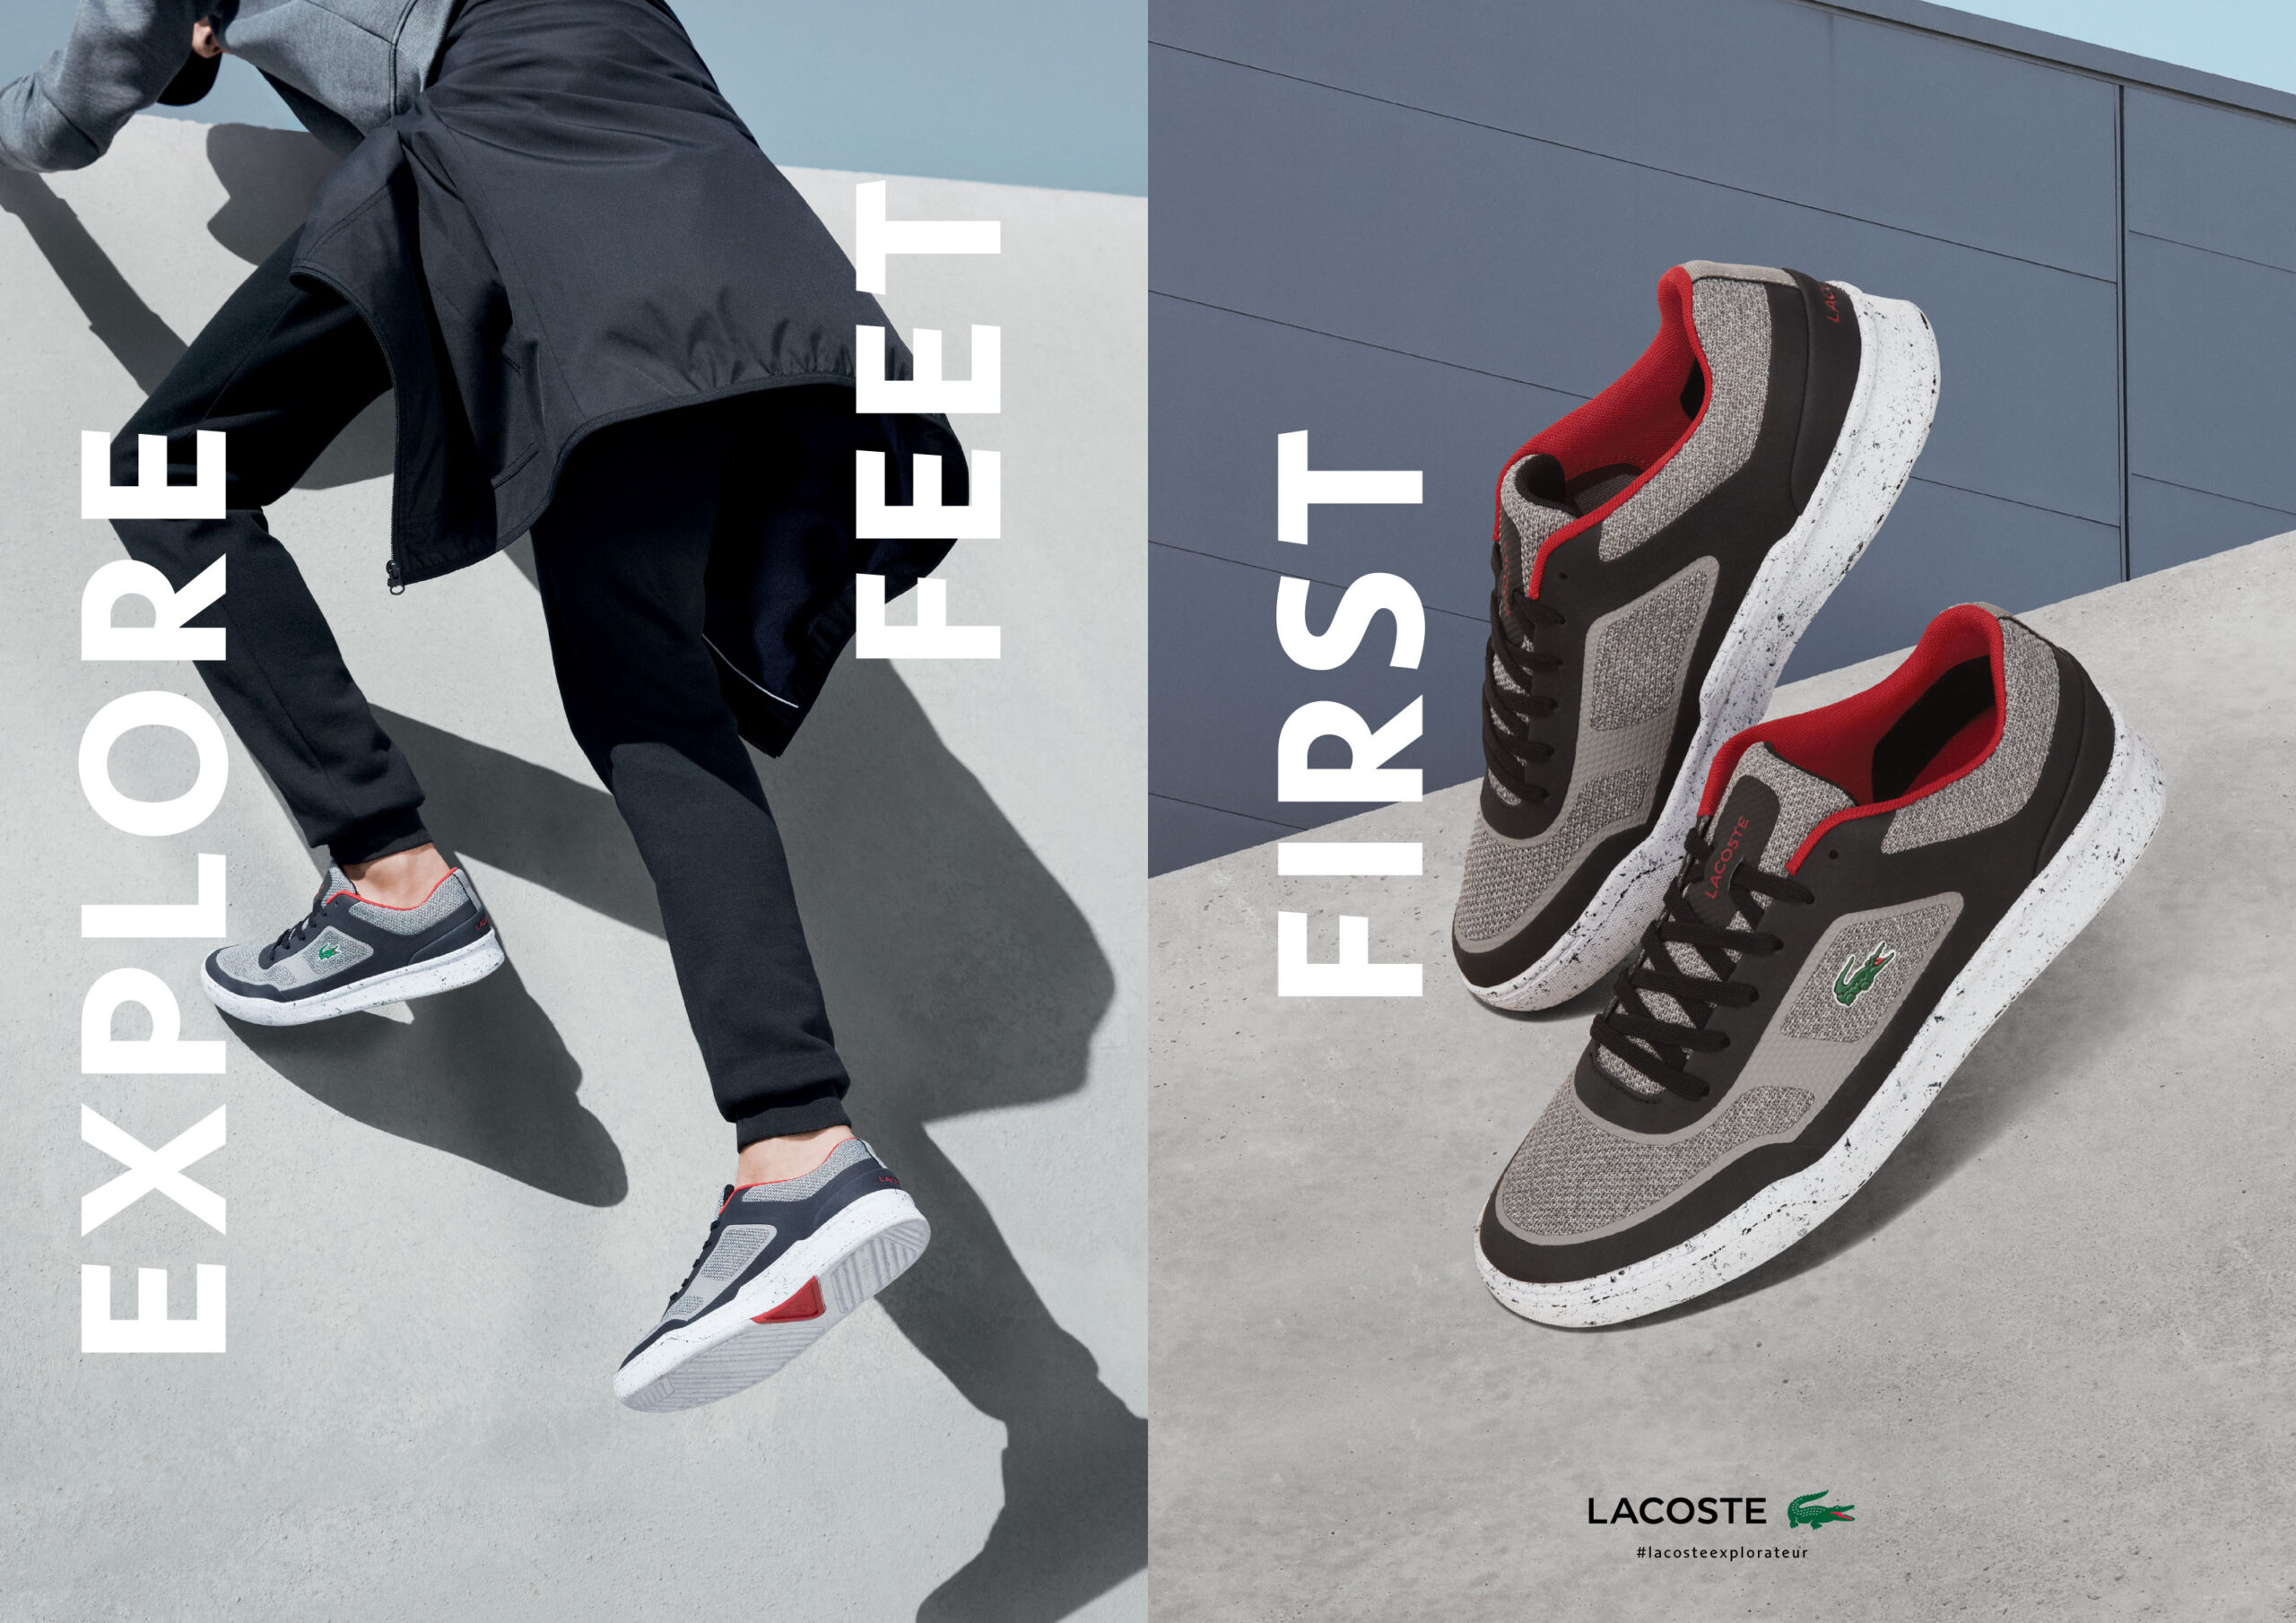 Lacoste Explore Feet First